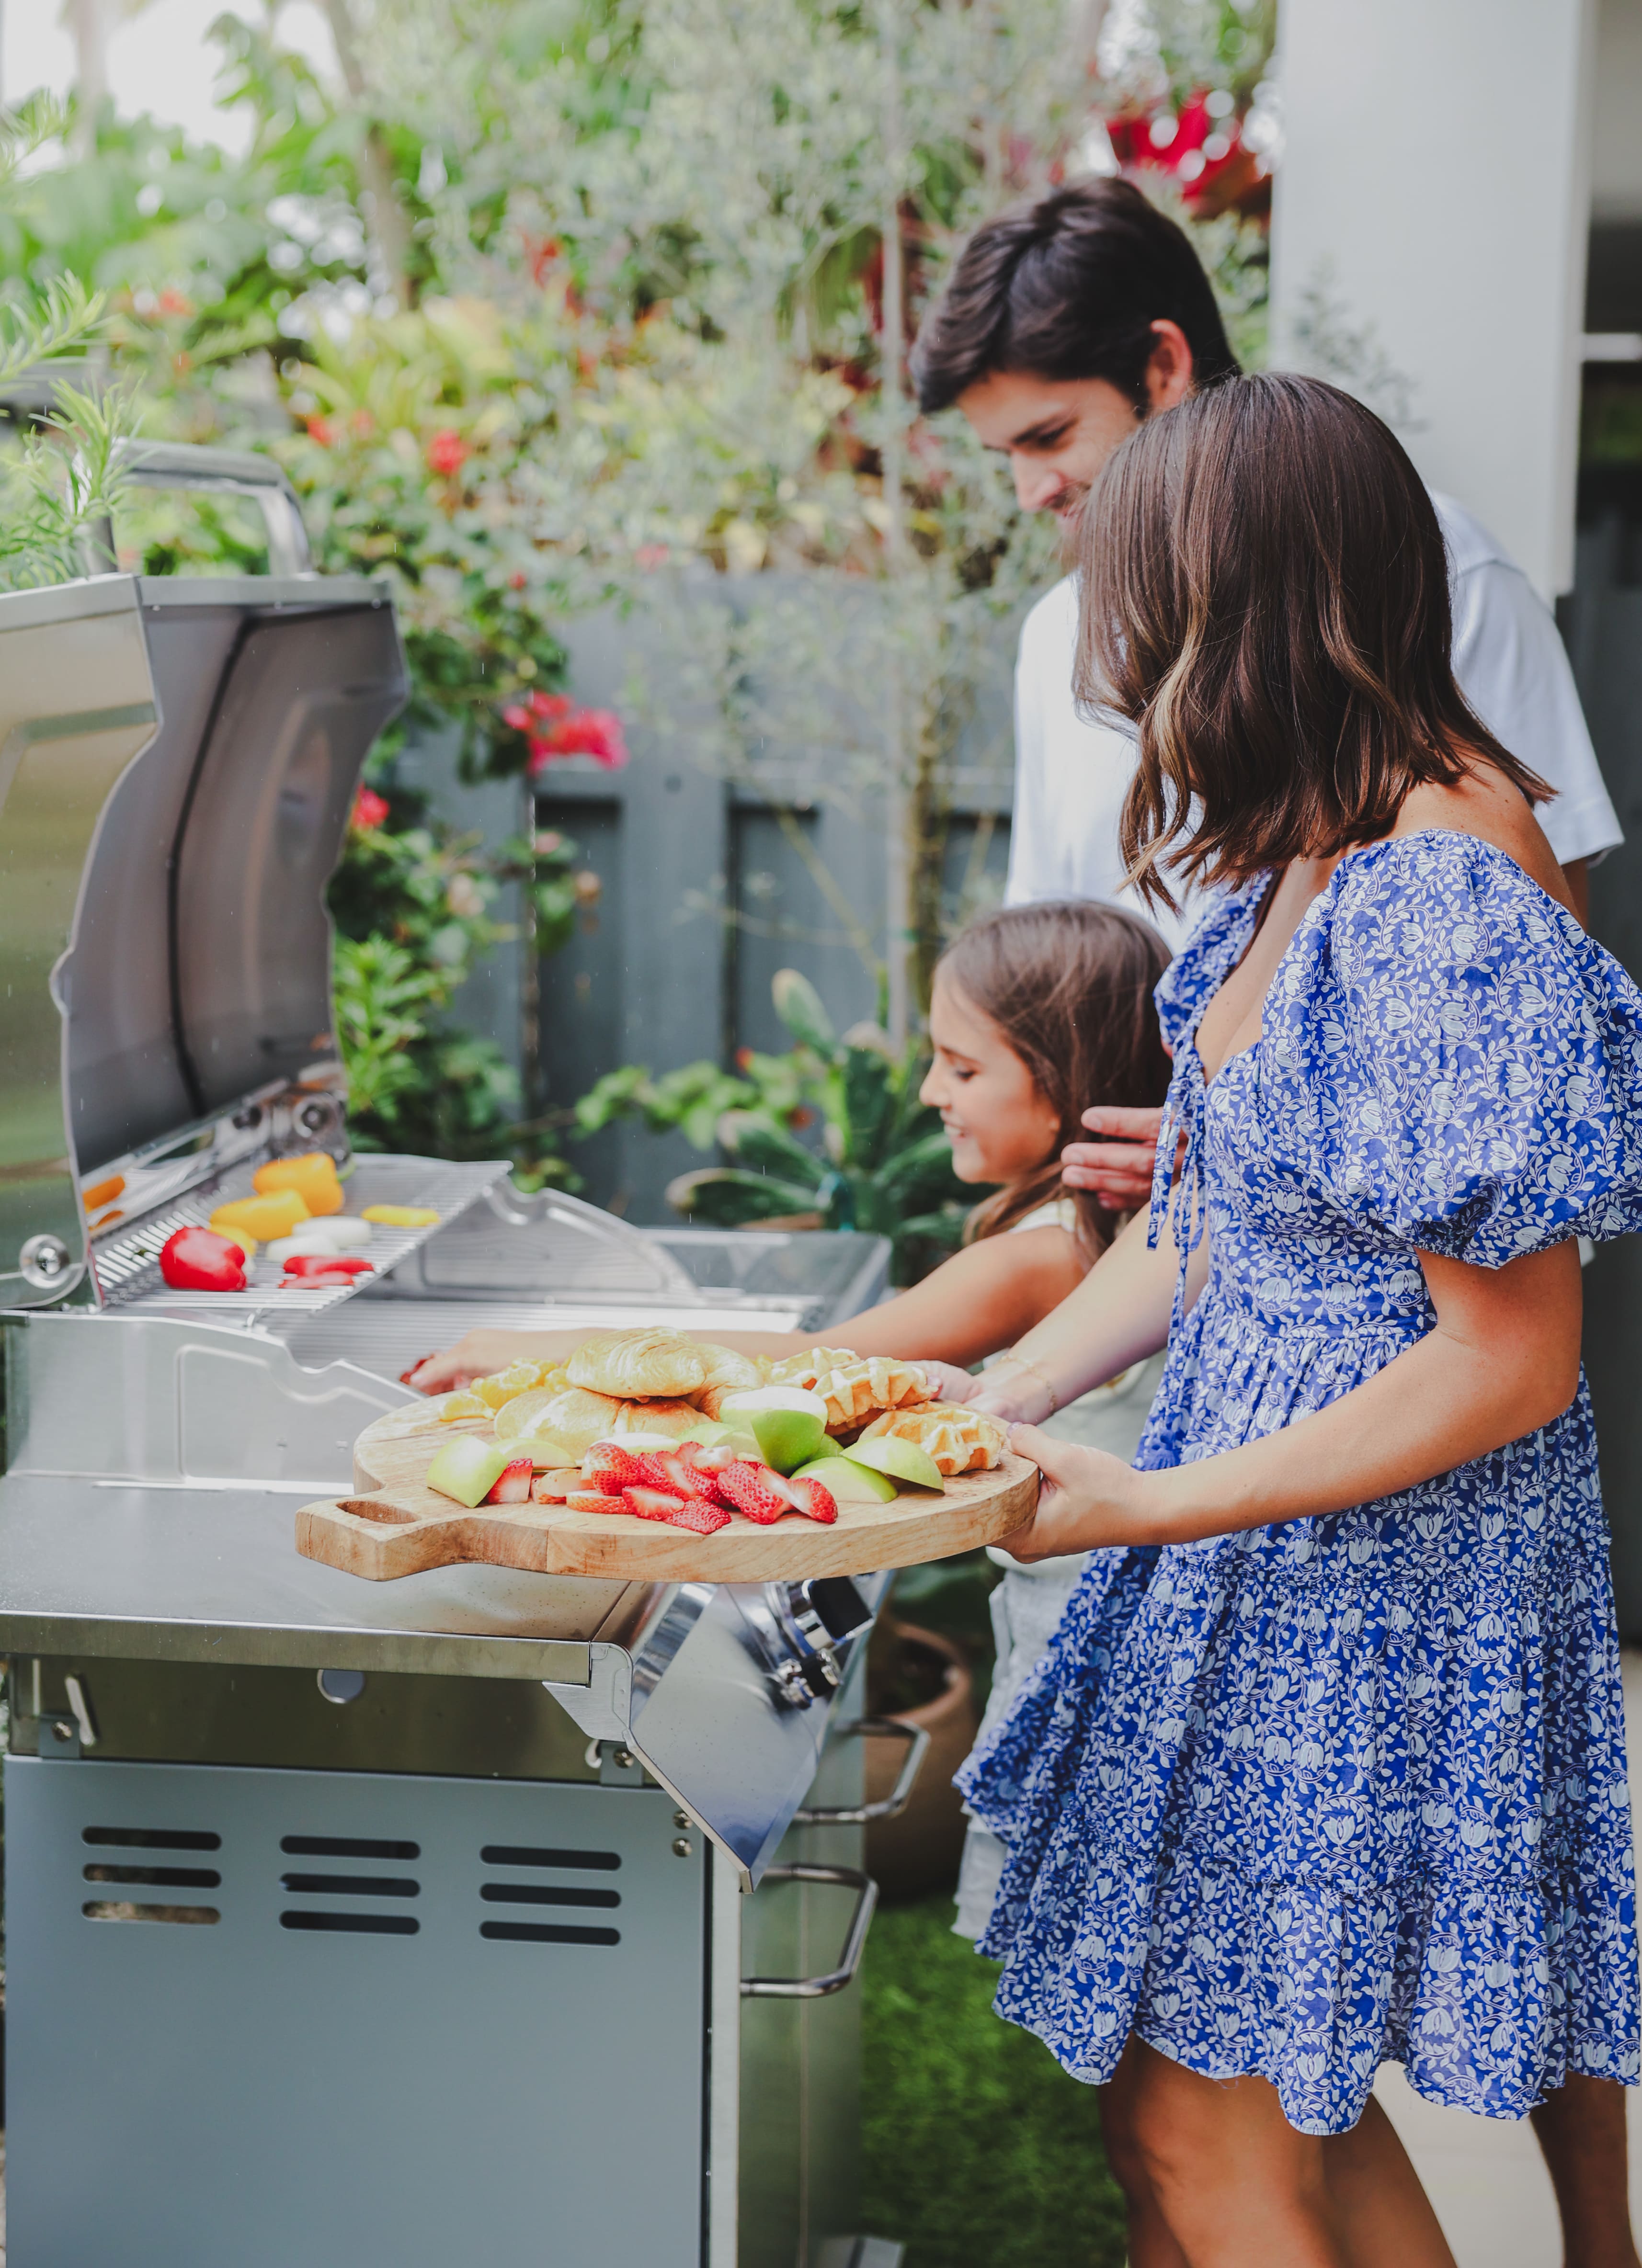 A family checking out their new grill